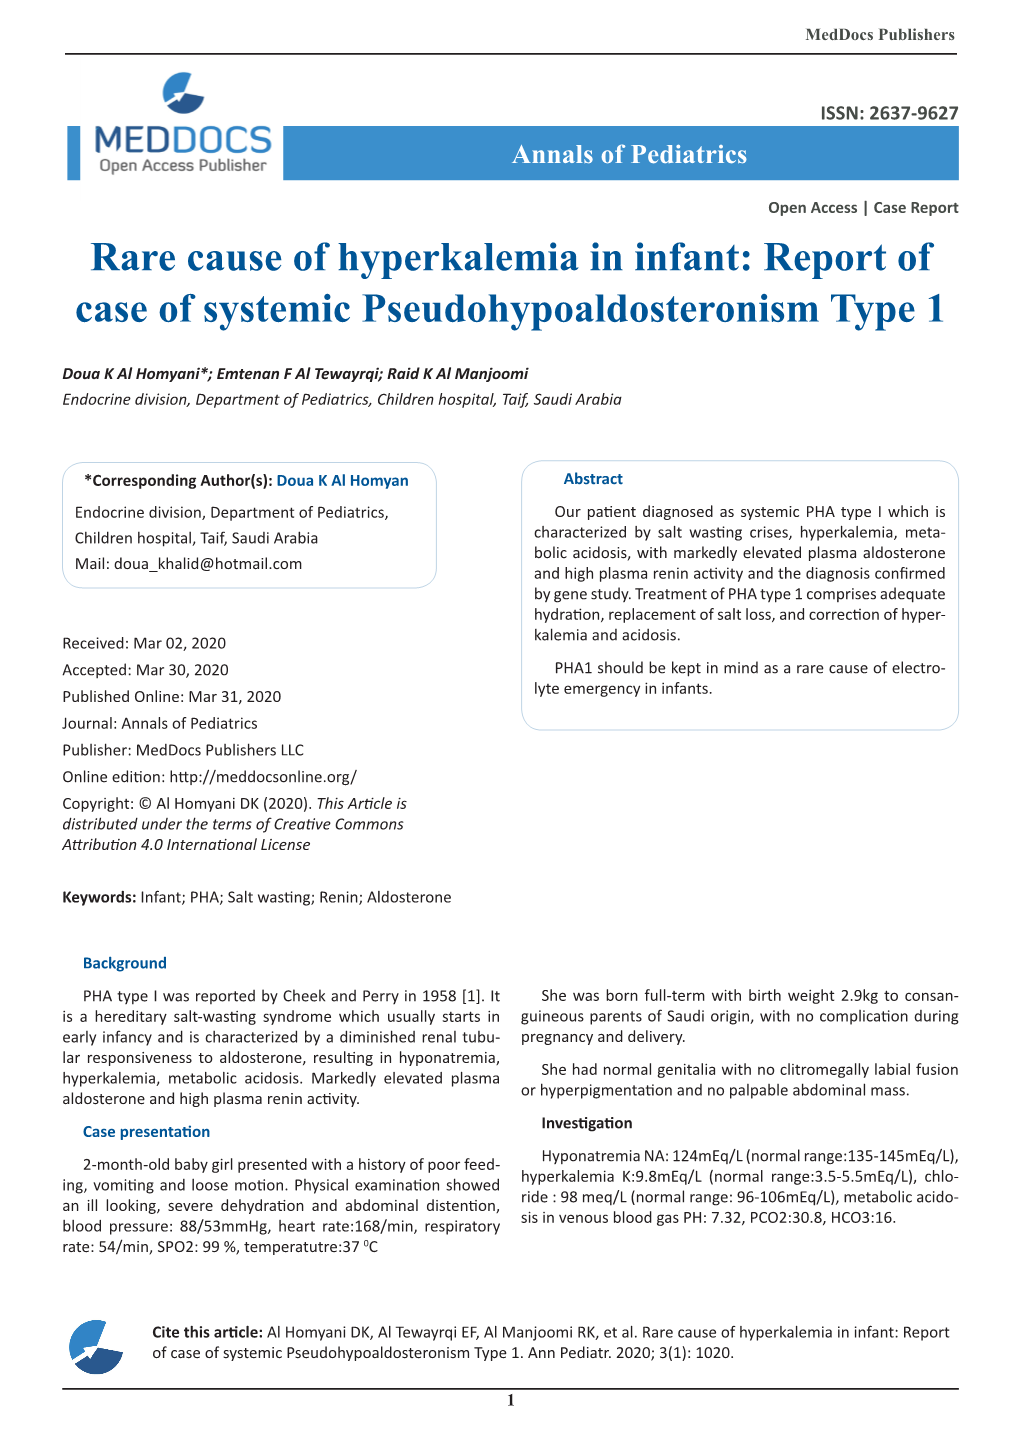 Rare Cause of Hyperkalemia in Infant: Report of Case of Systemic Pseudohypoaldosteronism Type 1